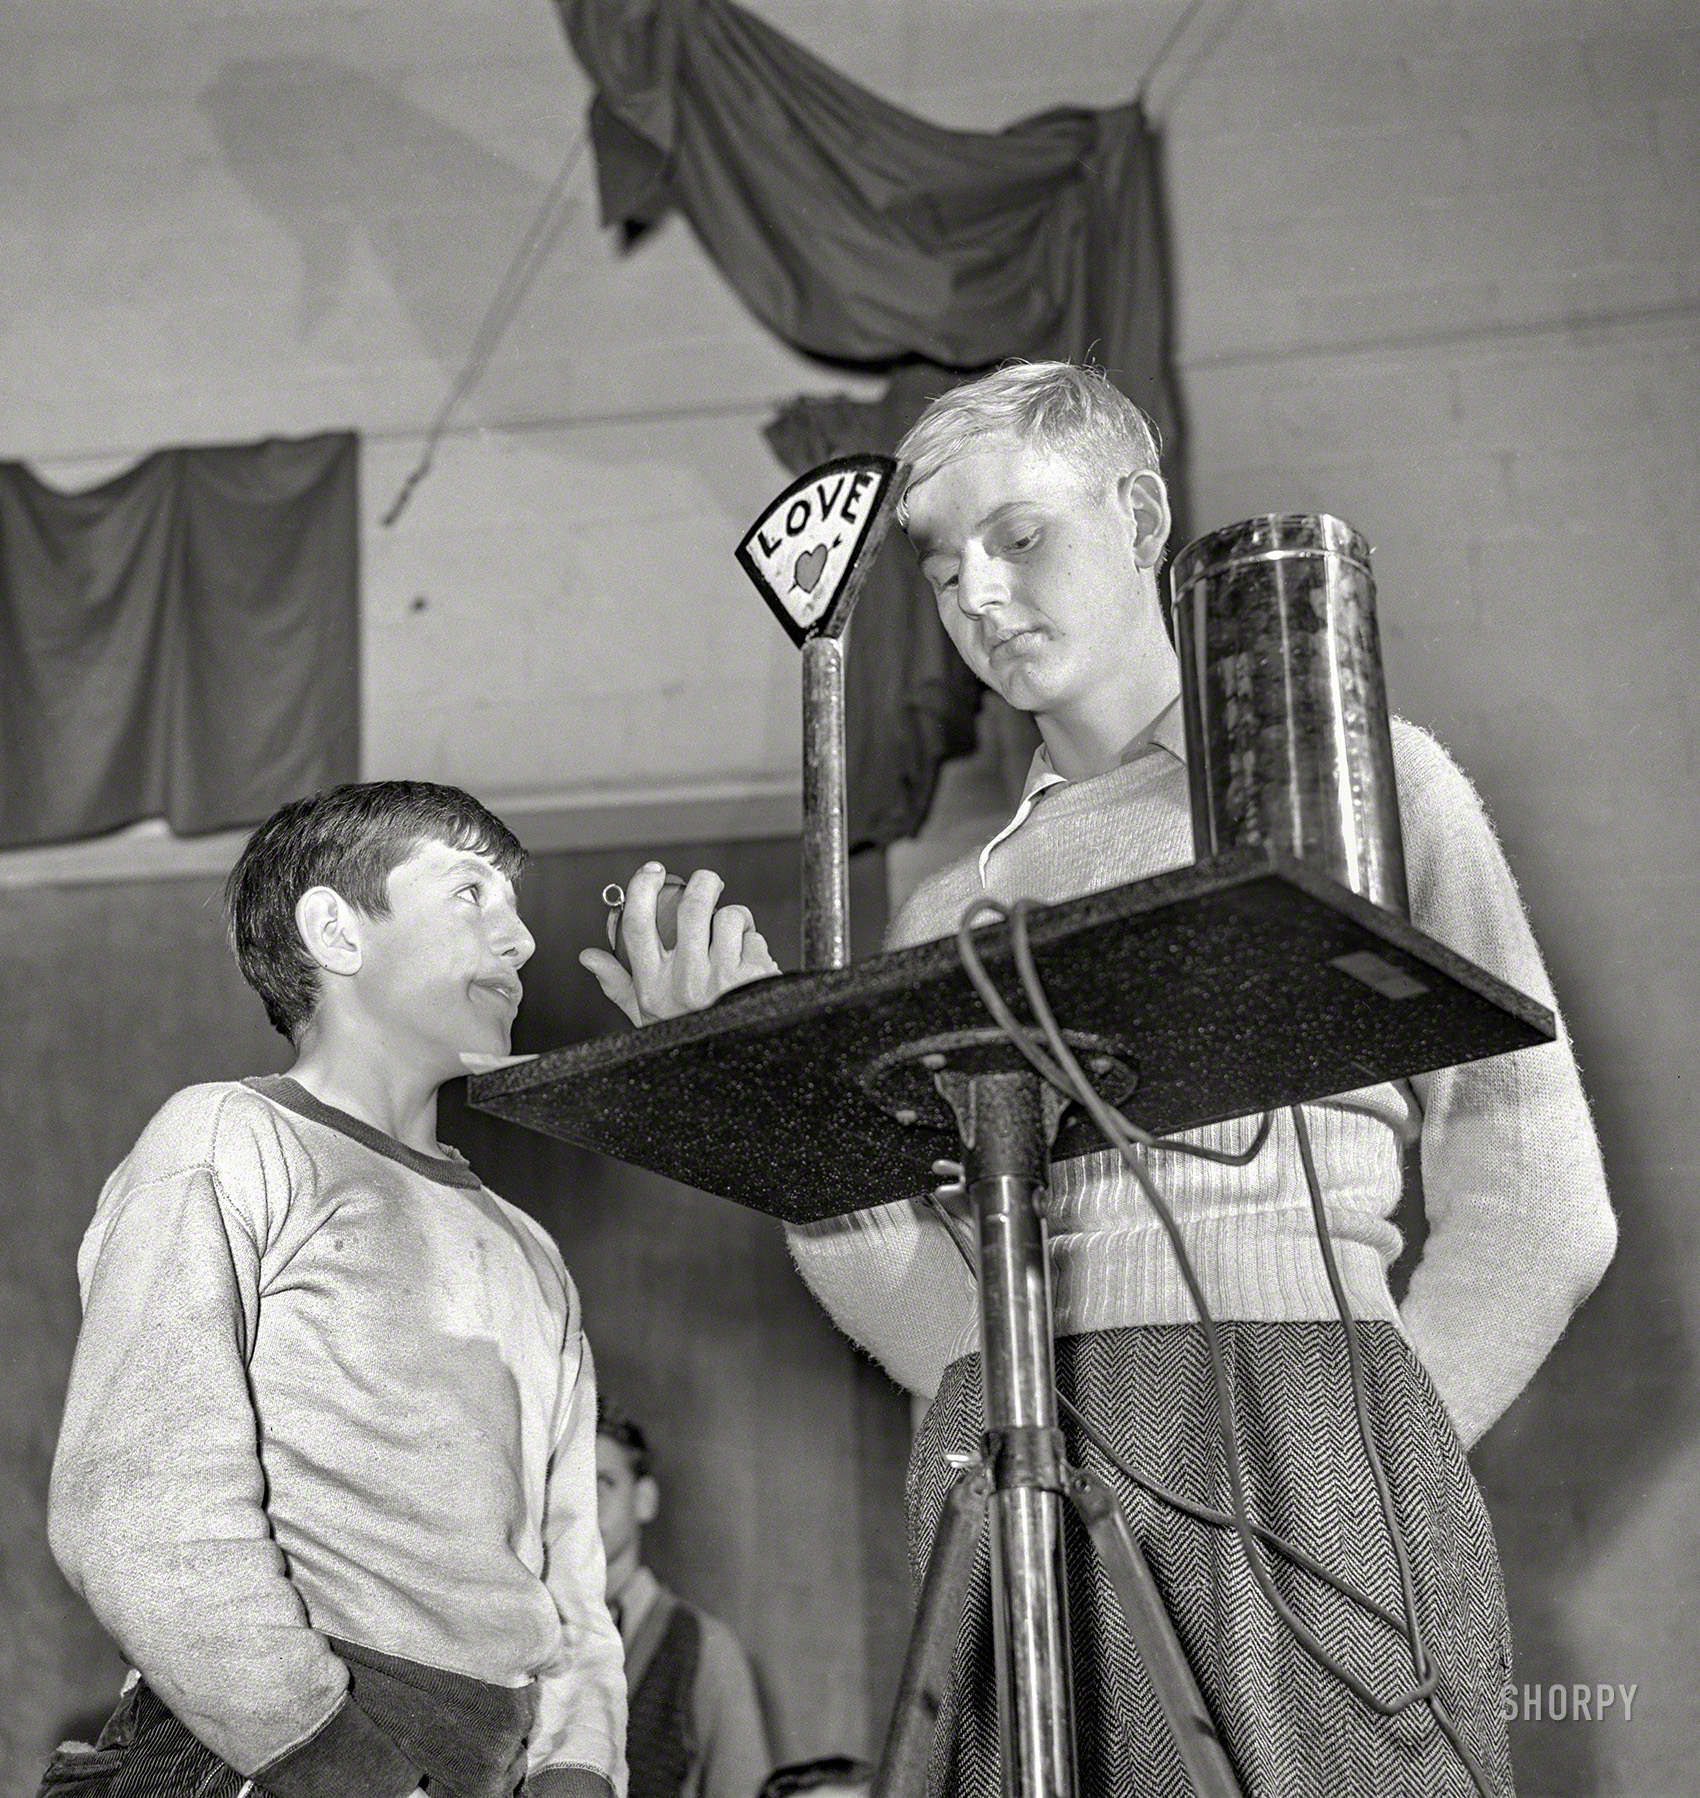 December 1941. "Assembly program radio quiz, station L-O-V-E. School of Tygart Valley Homesteads, an FSA project in Dailey, 11 miles southwest of Elkins, West Virginia." Photo by Arthur Rothstein for the FSA. View full size.